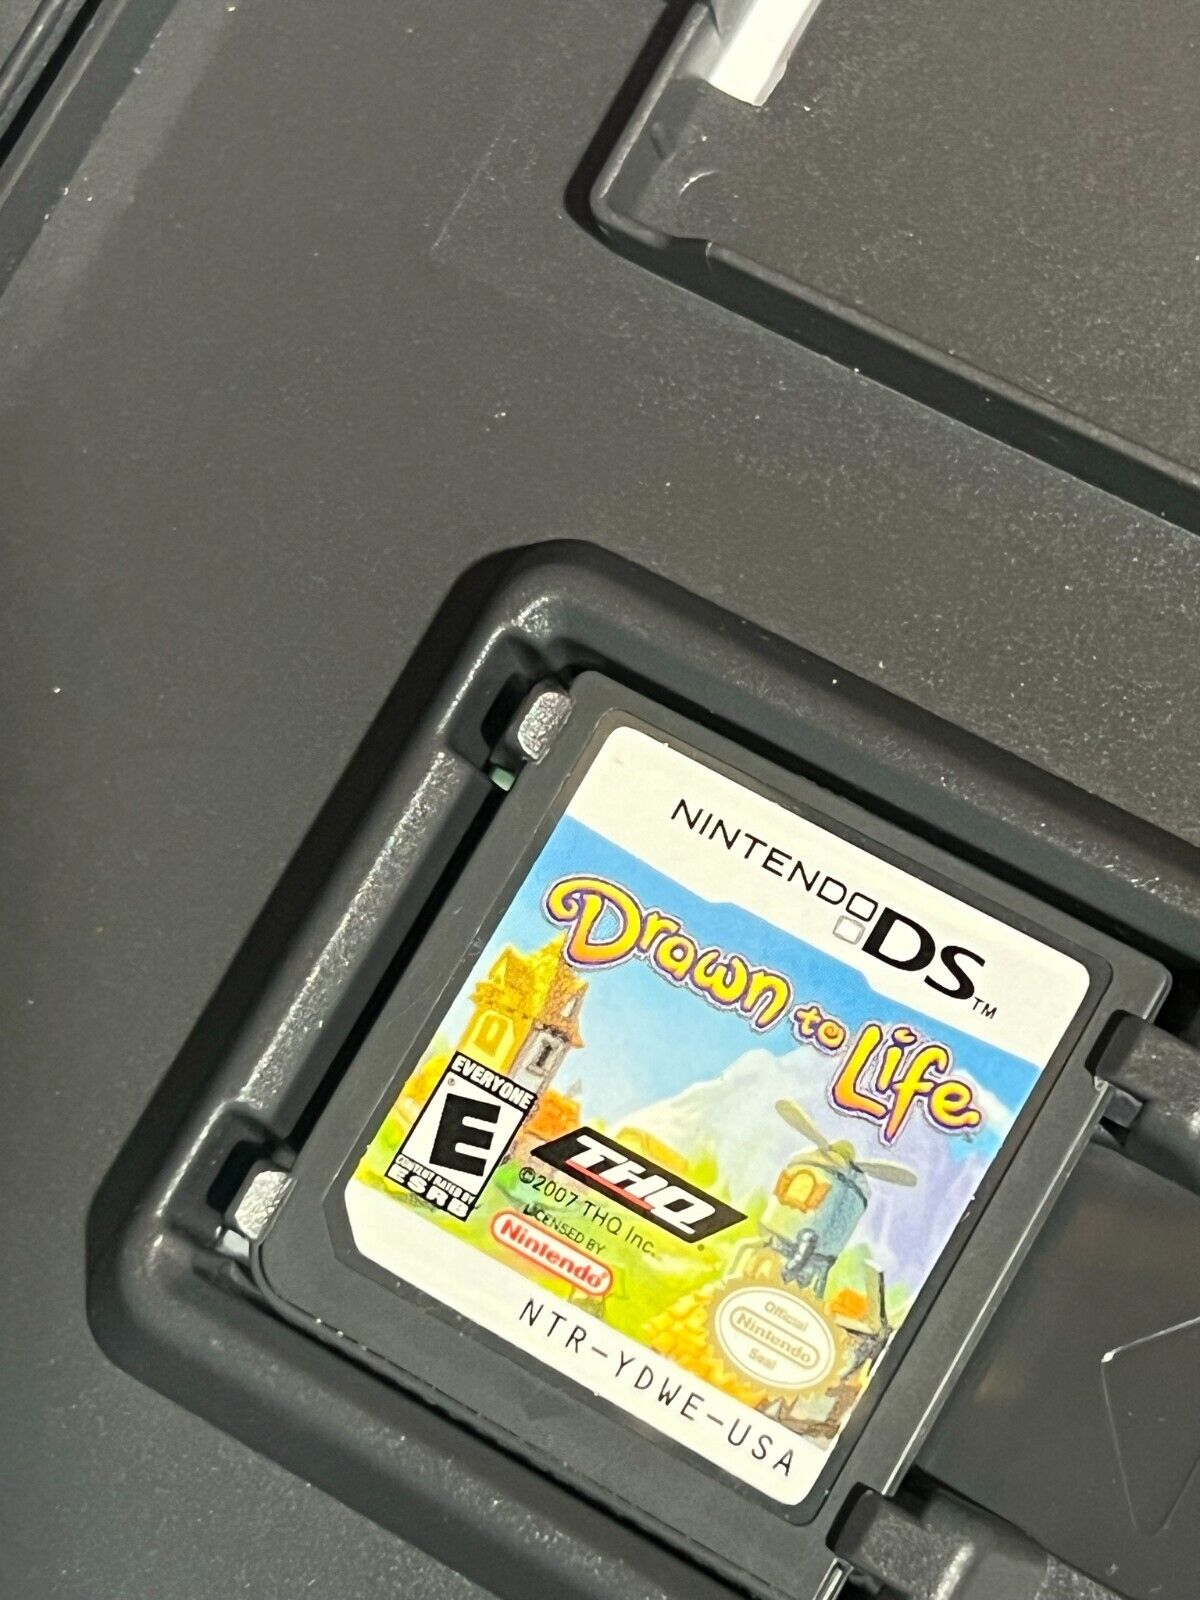 Drawn to Life (Nintendo DS, 2007) - Tested